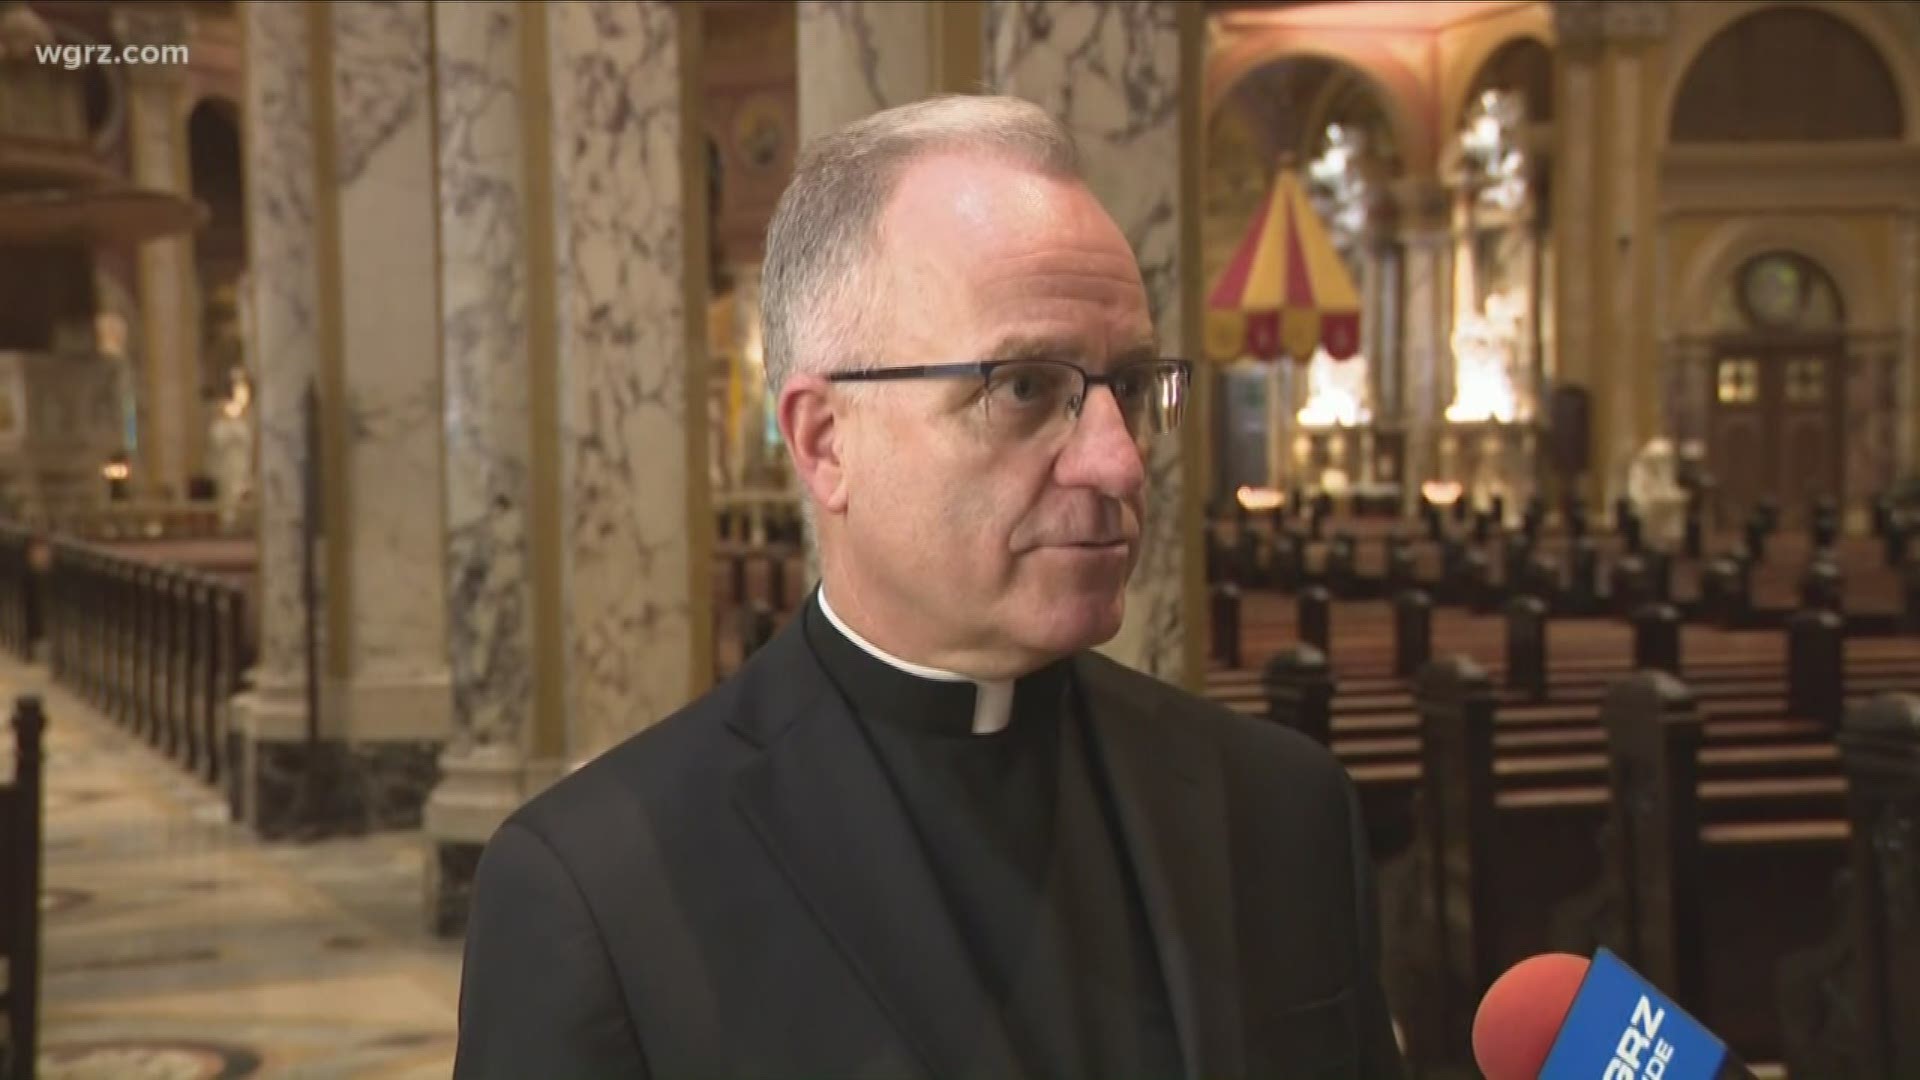 The Vatican Press Office announced Wednesday morning that Bishop Richard Malone has resigned.